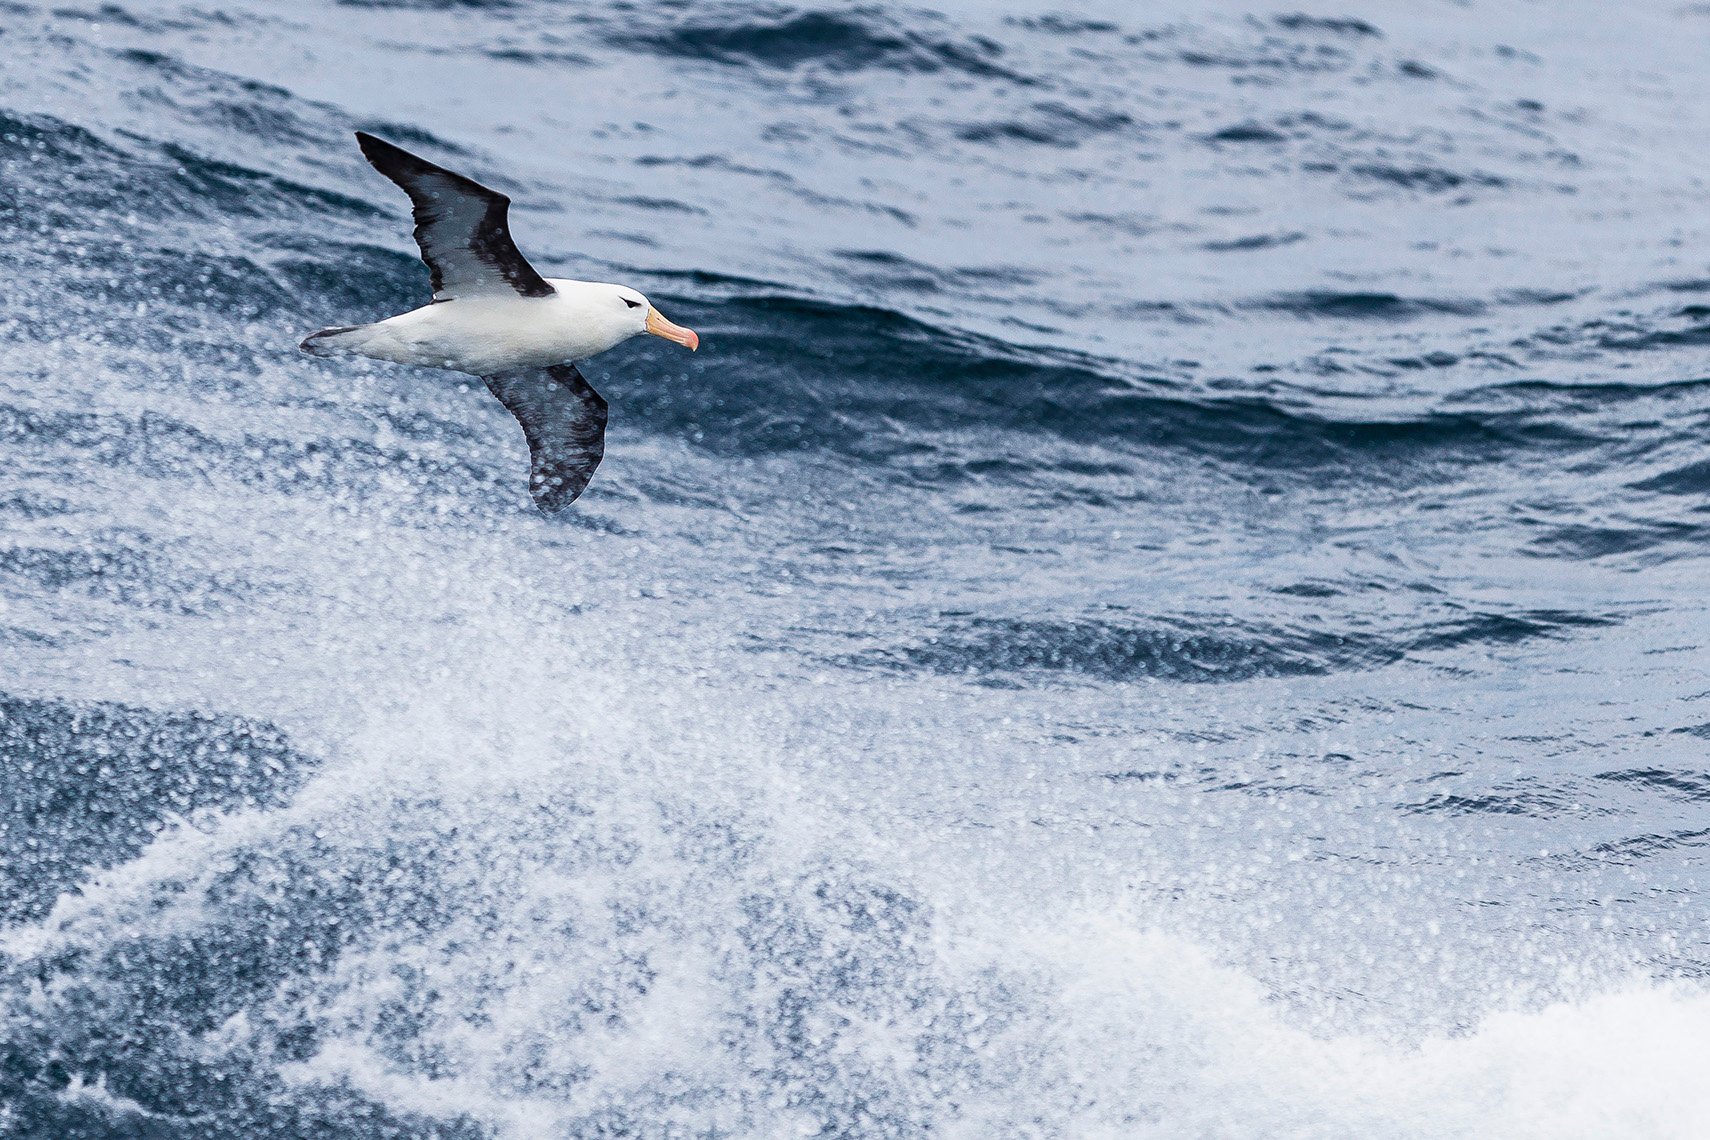 Bird-watching is one of the many on-ship activities guests enjoy while on the Drake Passage crossing.